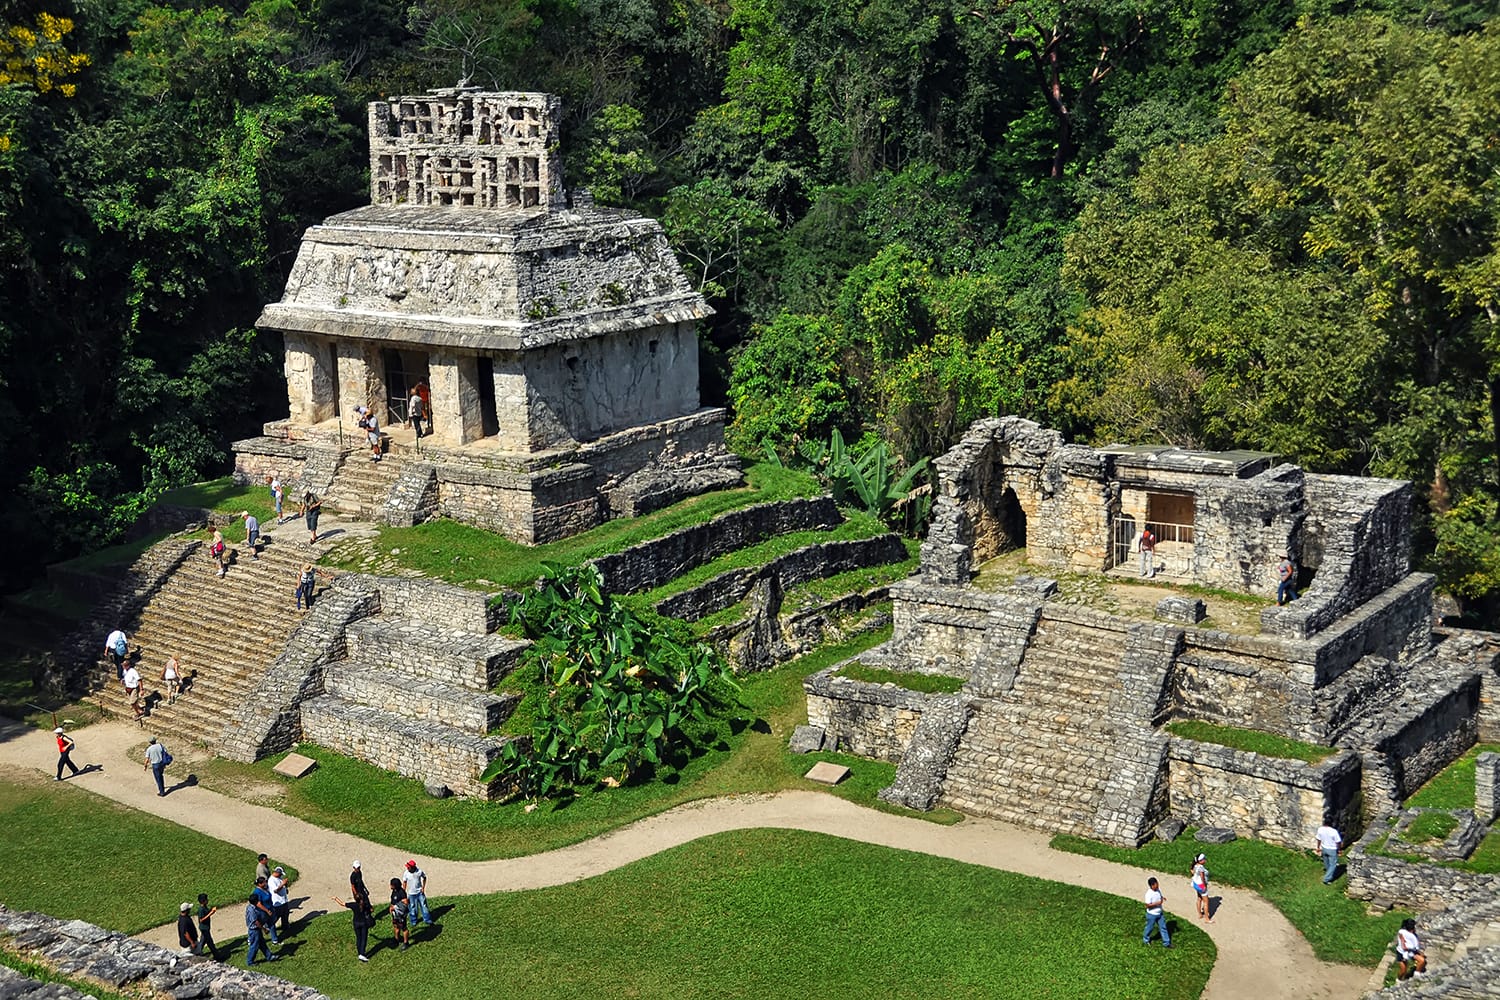 Palenque in Chiapas, Mexico, is a must-see